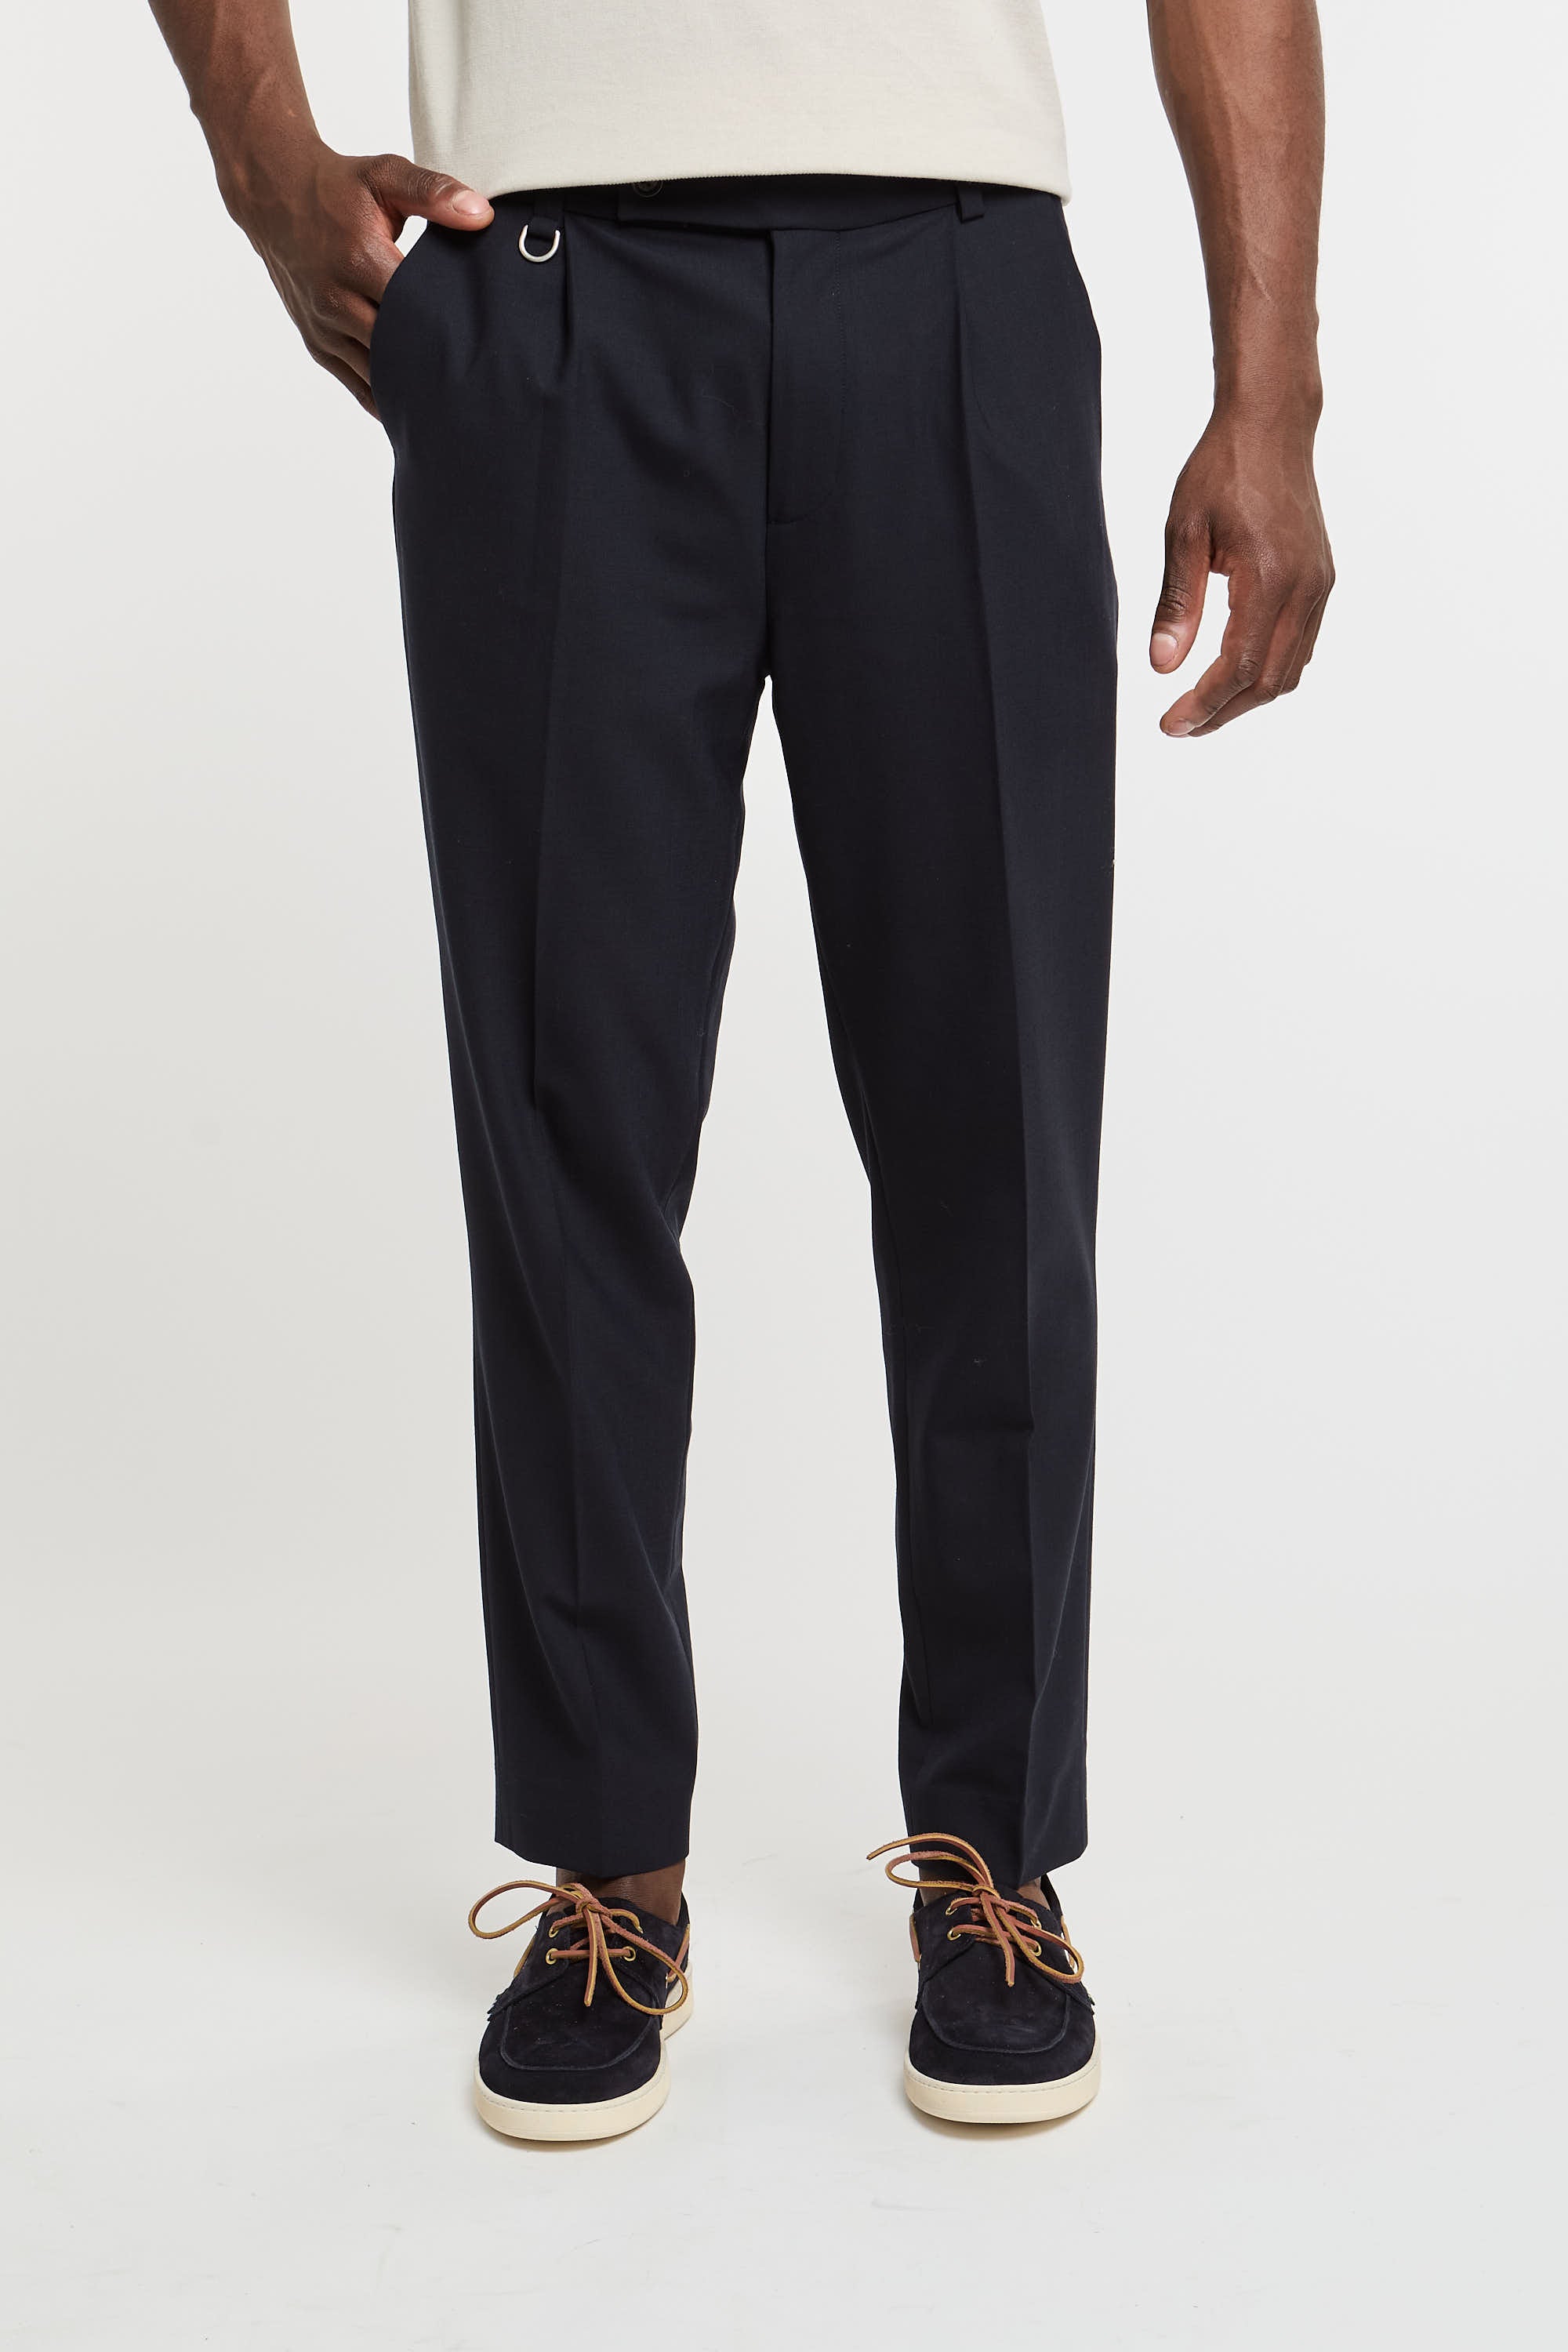 Paolo Pecora Wool/Polyester/Elastane Blue Trousers-1